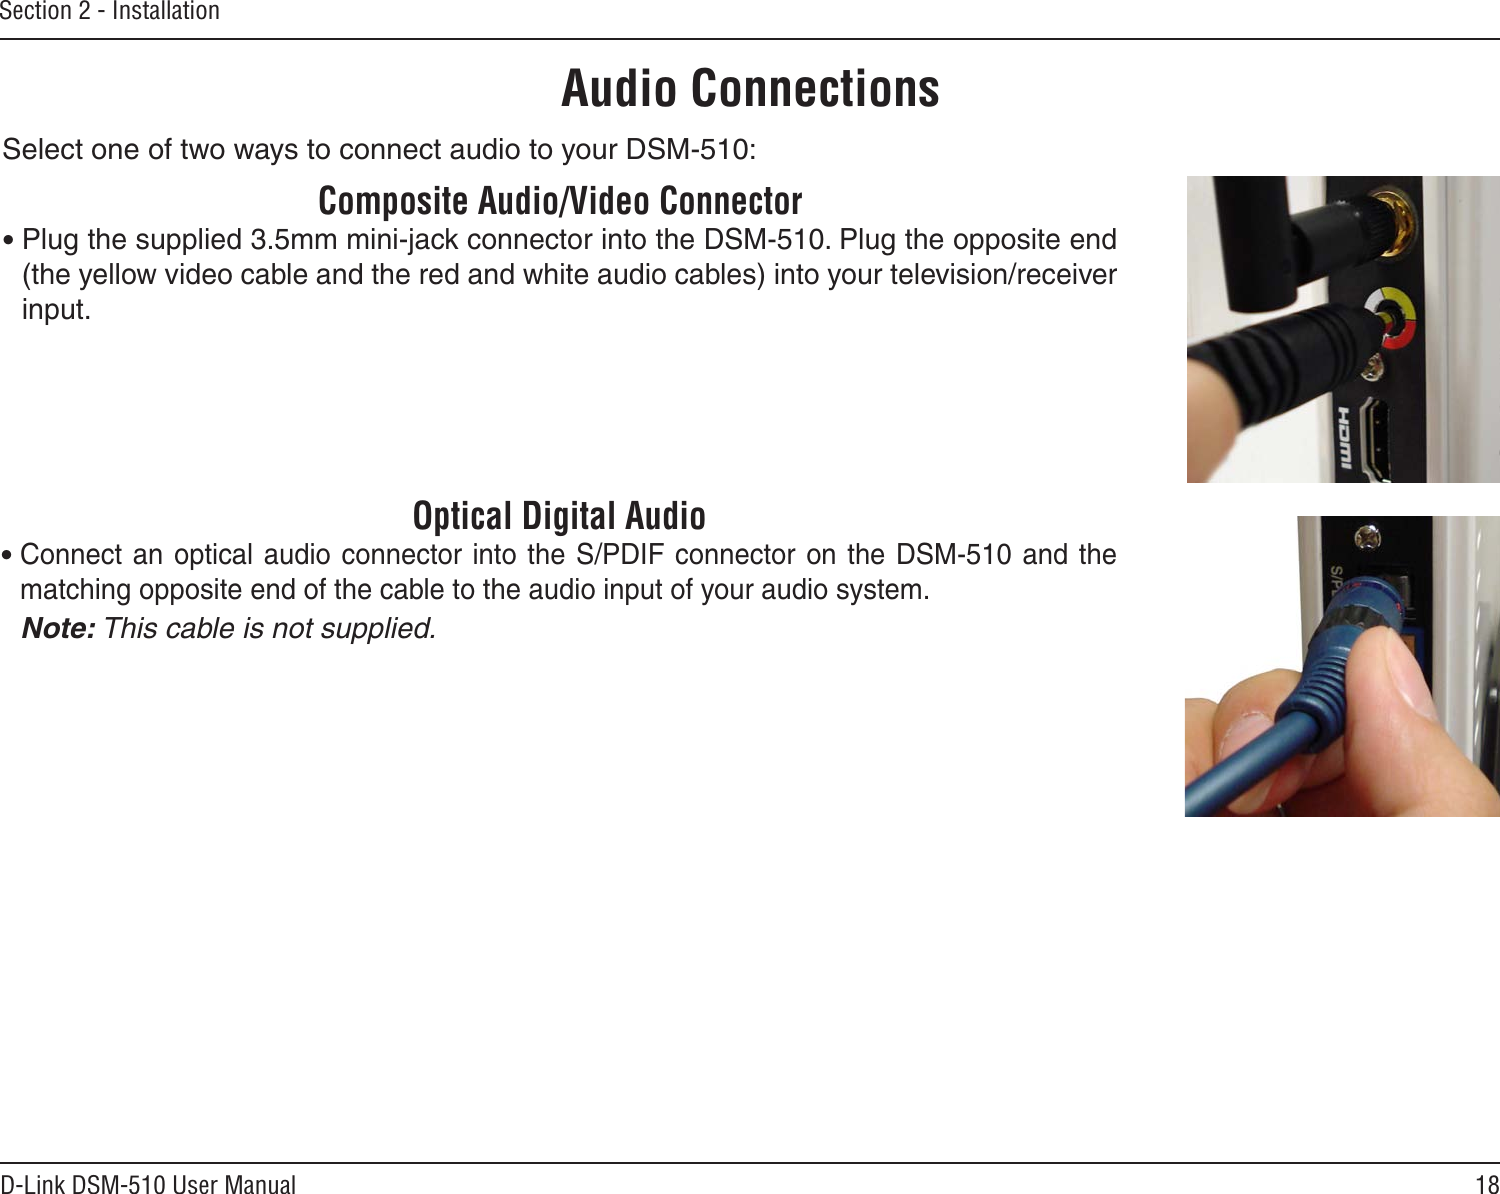 18D-Link DSM-510 User ManualSection 2 - InstallationAudio ConnectionsSelect one of two ways to connect audio to your DSM-510:Optical Digital Audio• Connect an optical  audio  connector into the S/PDIF  connector  on the DSM-510 and  the matching opposite end of the cable to the audio input of your audio system.  Note: This cable is not supplied.Composite Audio/Video Connector• Plug the supplied 3.5mm mini-jack connector into the DSM-510. Plug the opposite end (the yellow video cable and the red and white audio cables) into your television/receiver input.